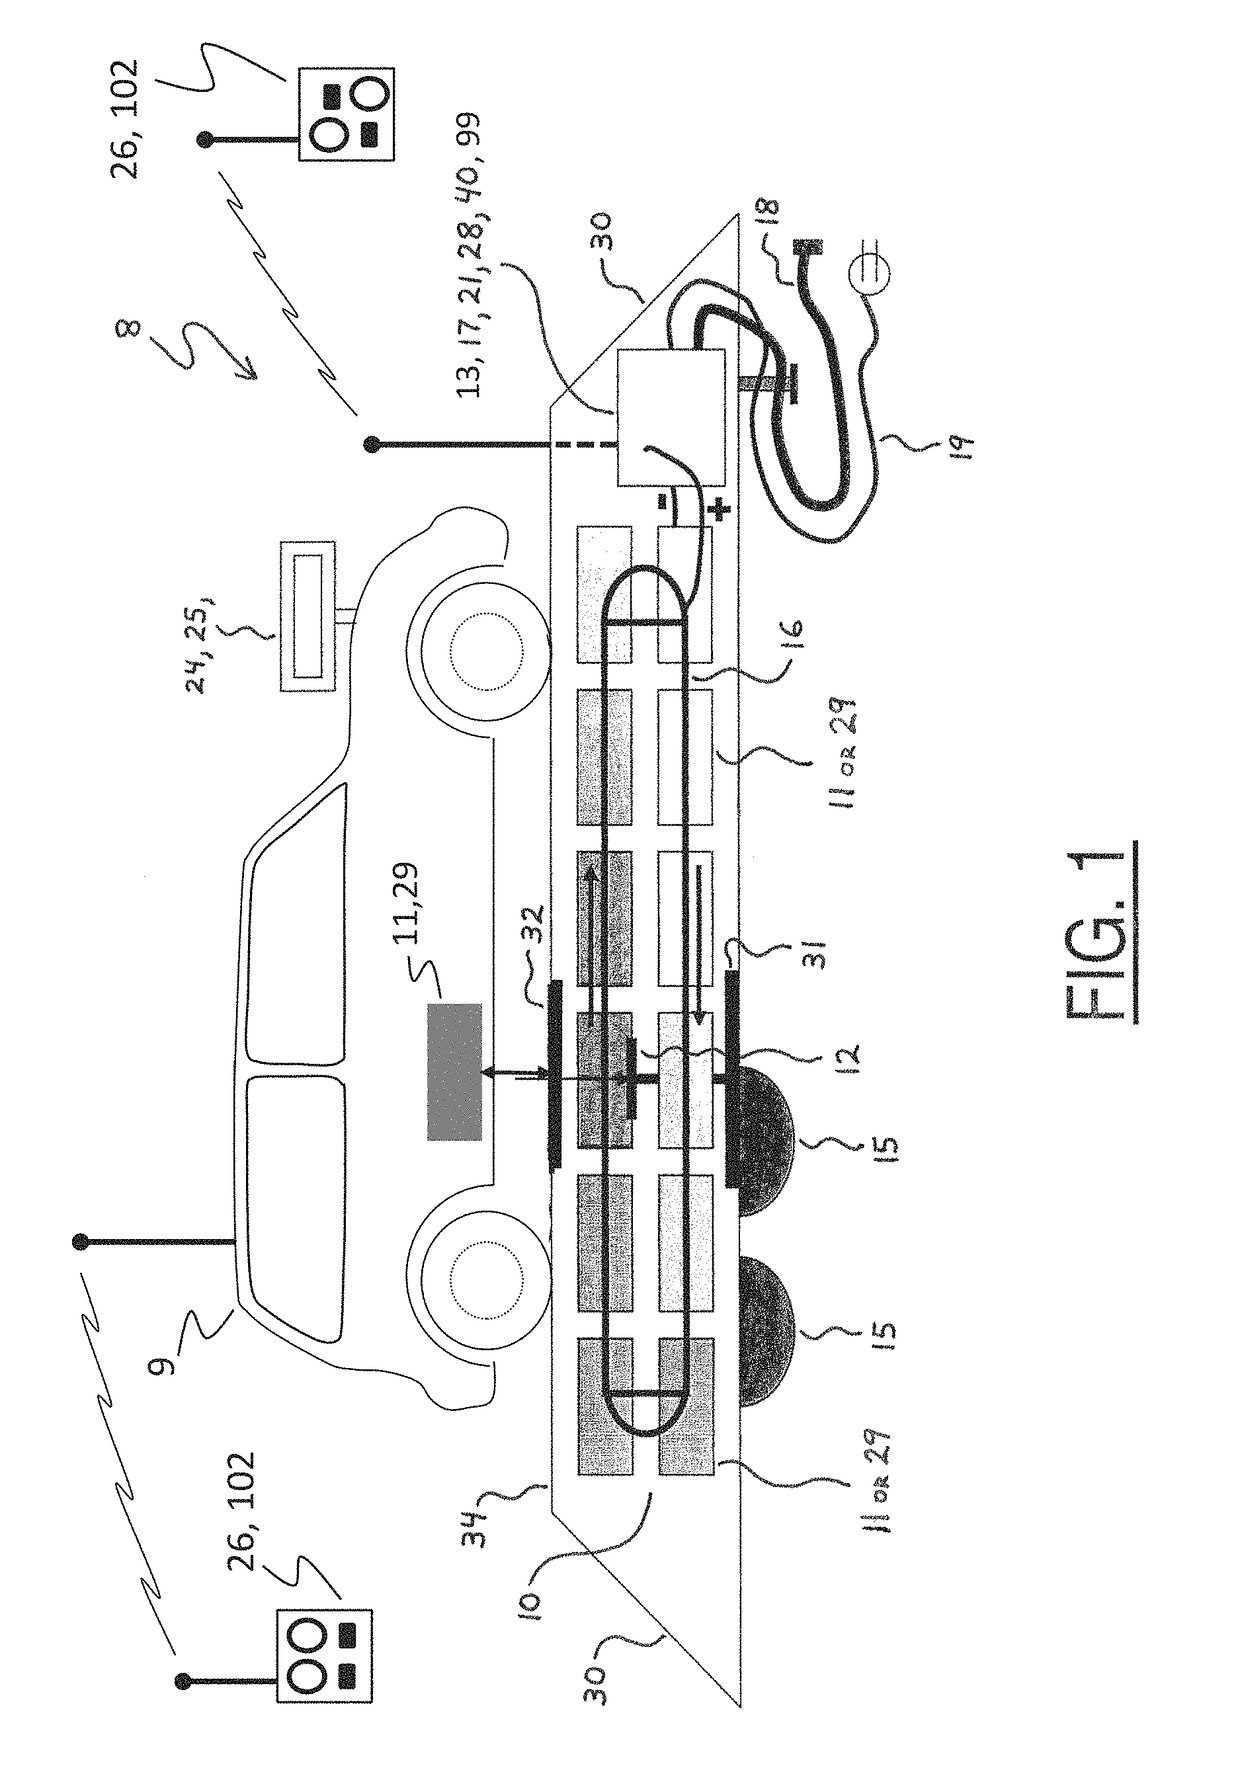 Device for refueling, exchanging, and charging power sources on remote controlled vehicles, UAVs, drones, or any type of robotic vehicle or machine with mobility